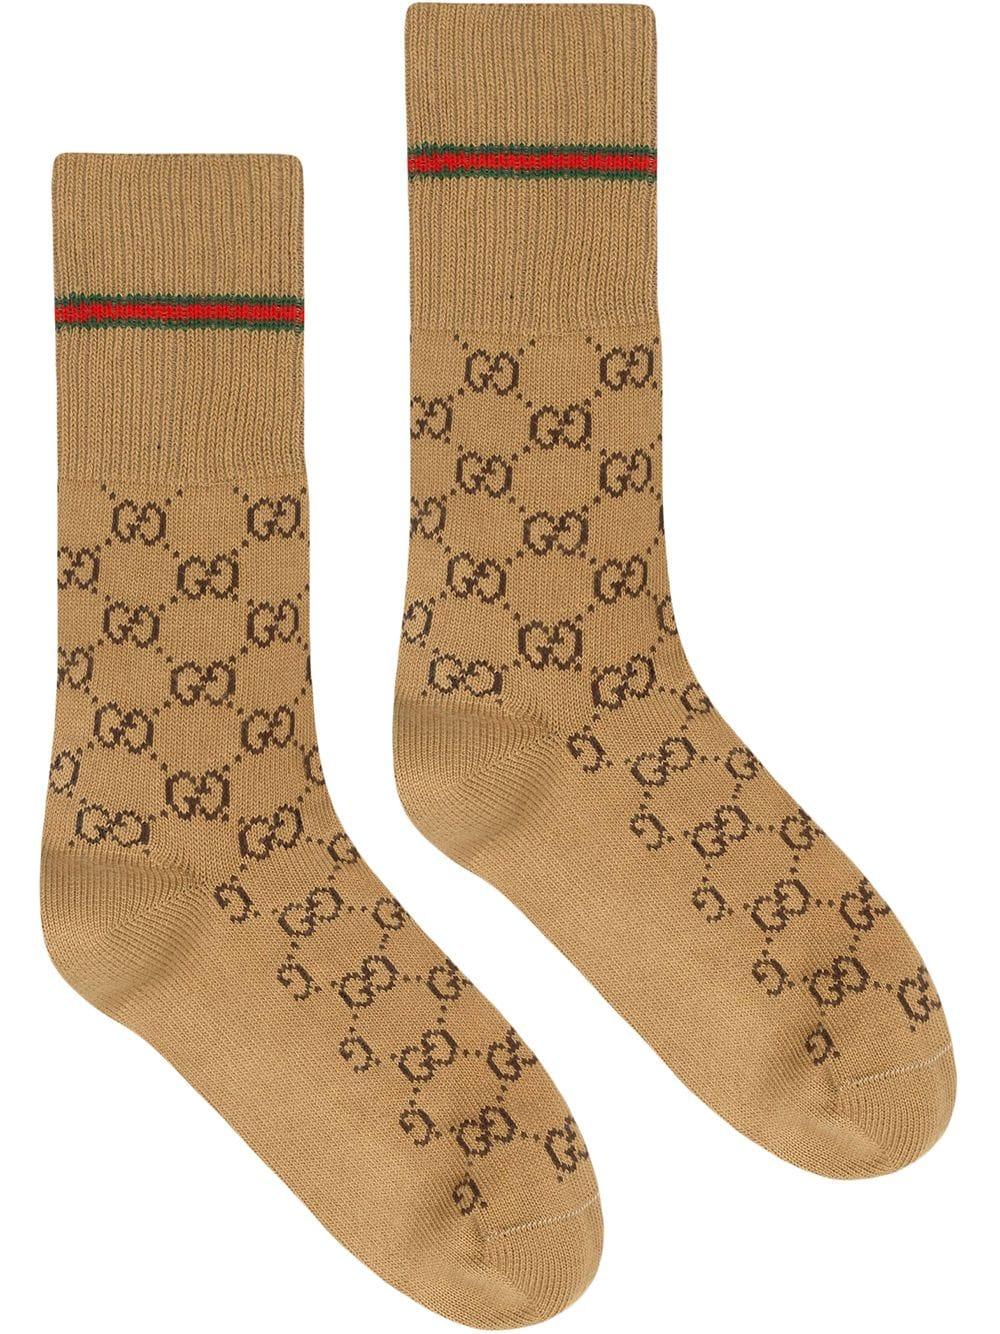 Gucci GG Cotton Socks With Web in Camel (Brown) for Men - Save 41% - Lyst